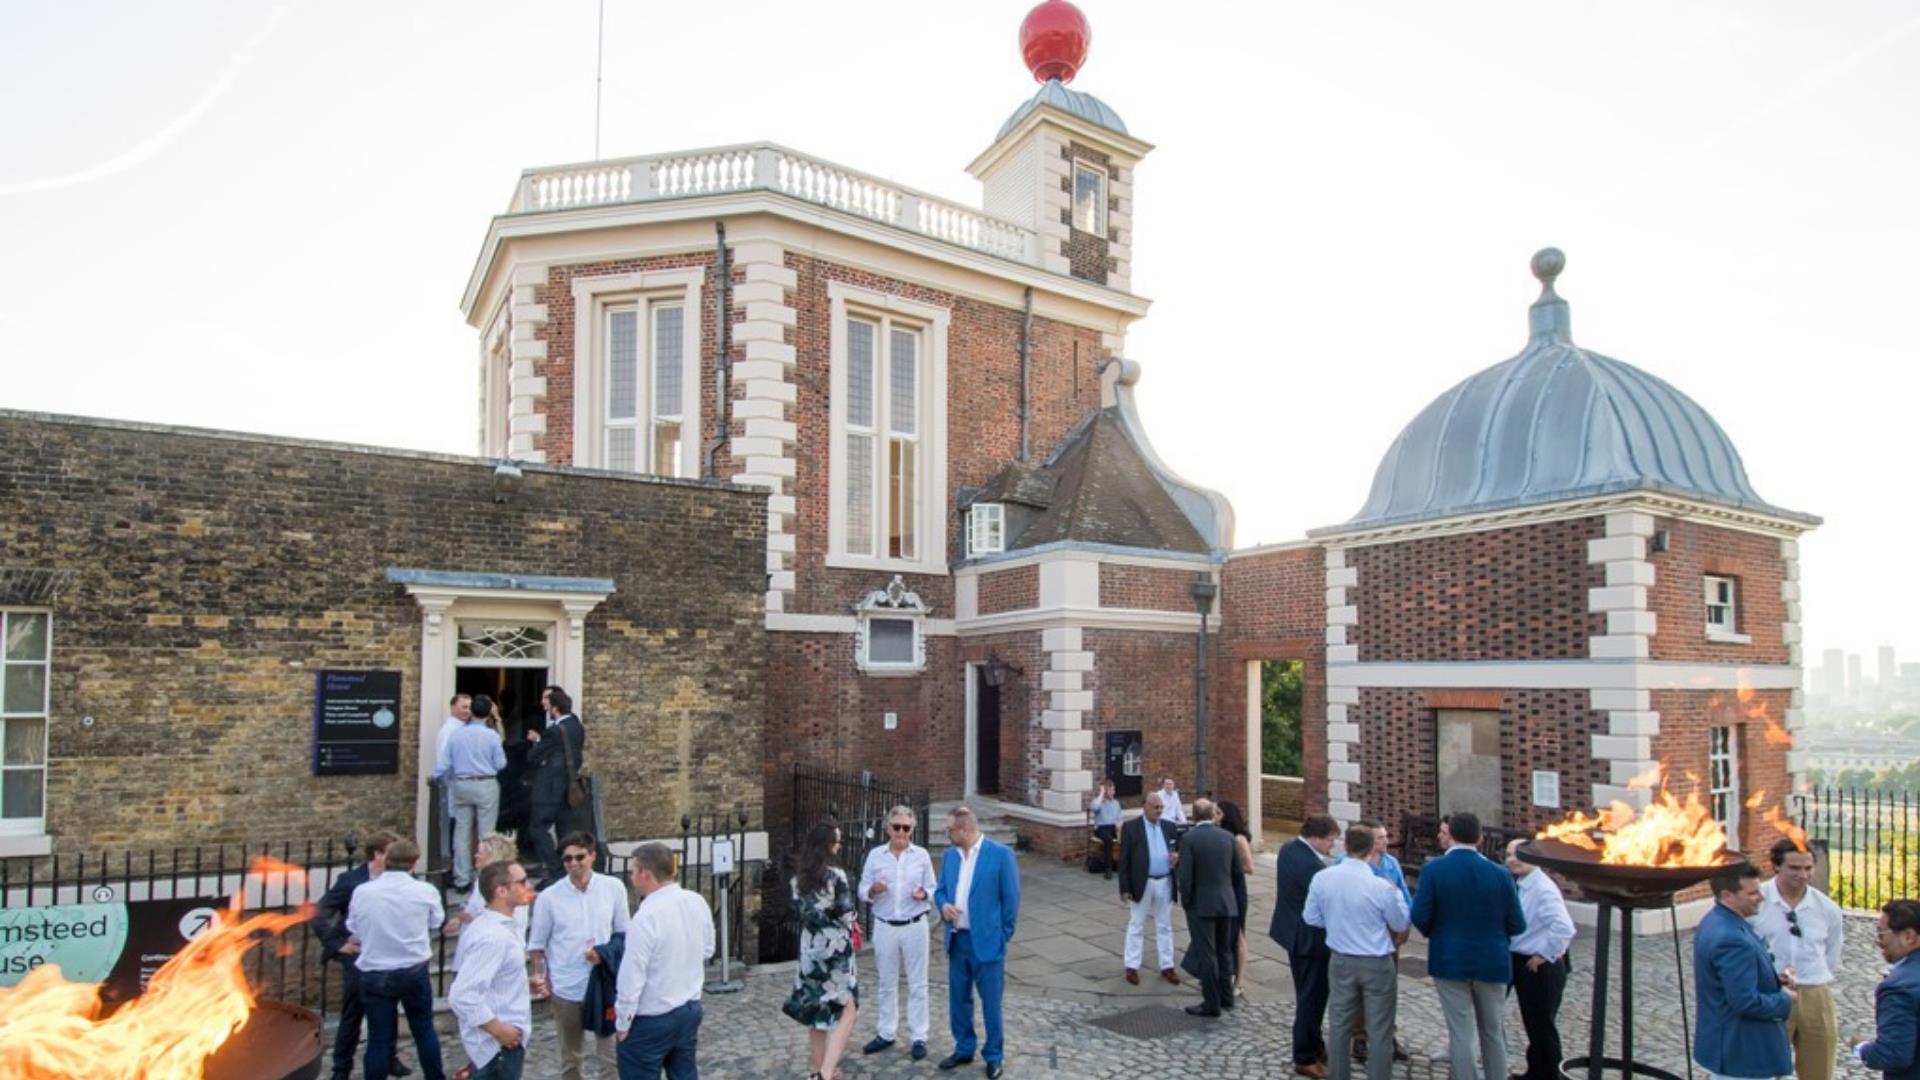 A group of people gather for an event in the grounds of the Royal Observatory in Greenwich.